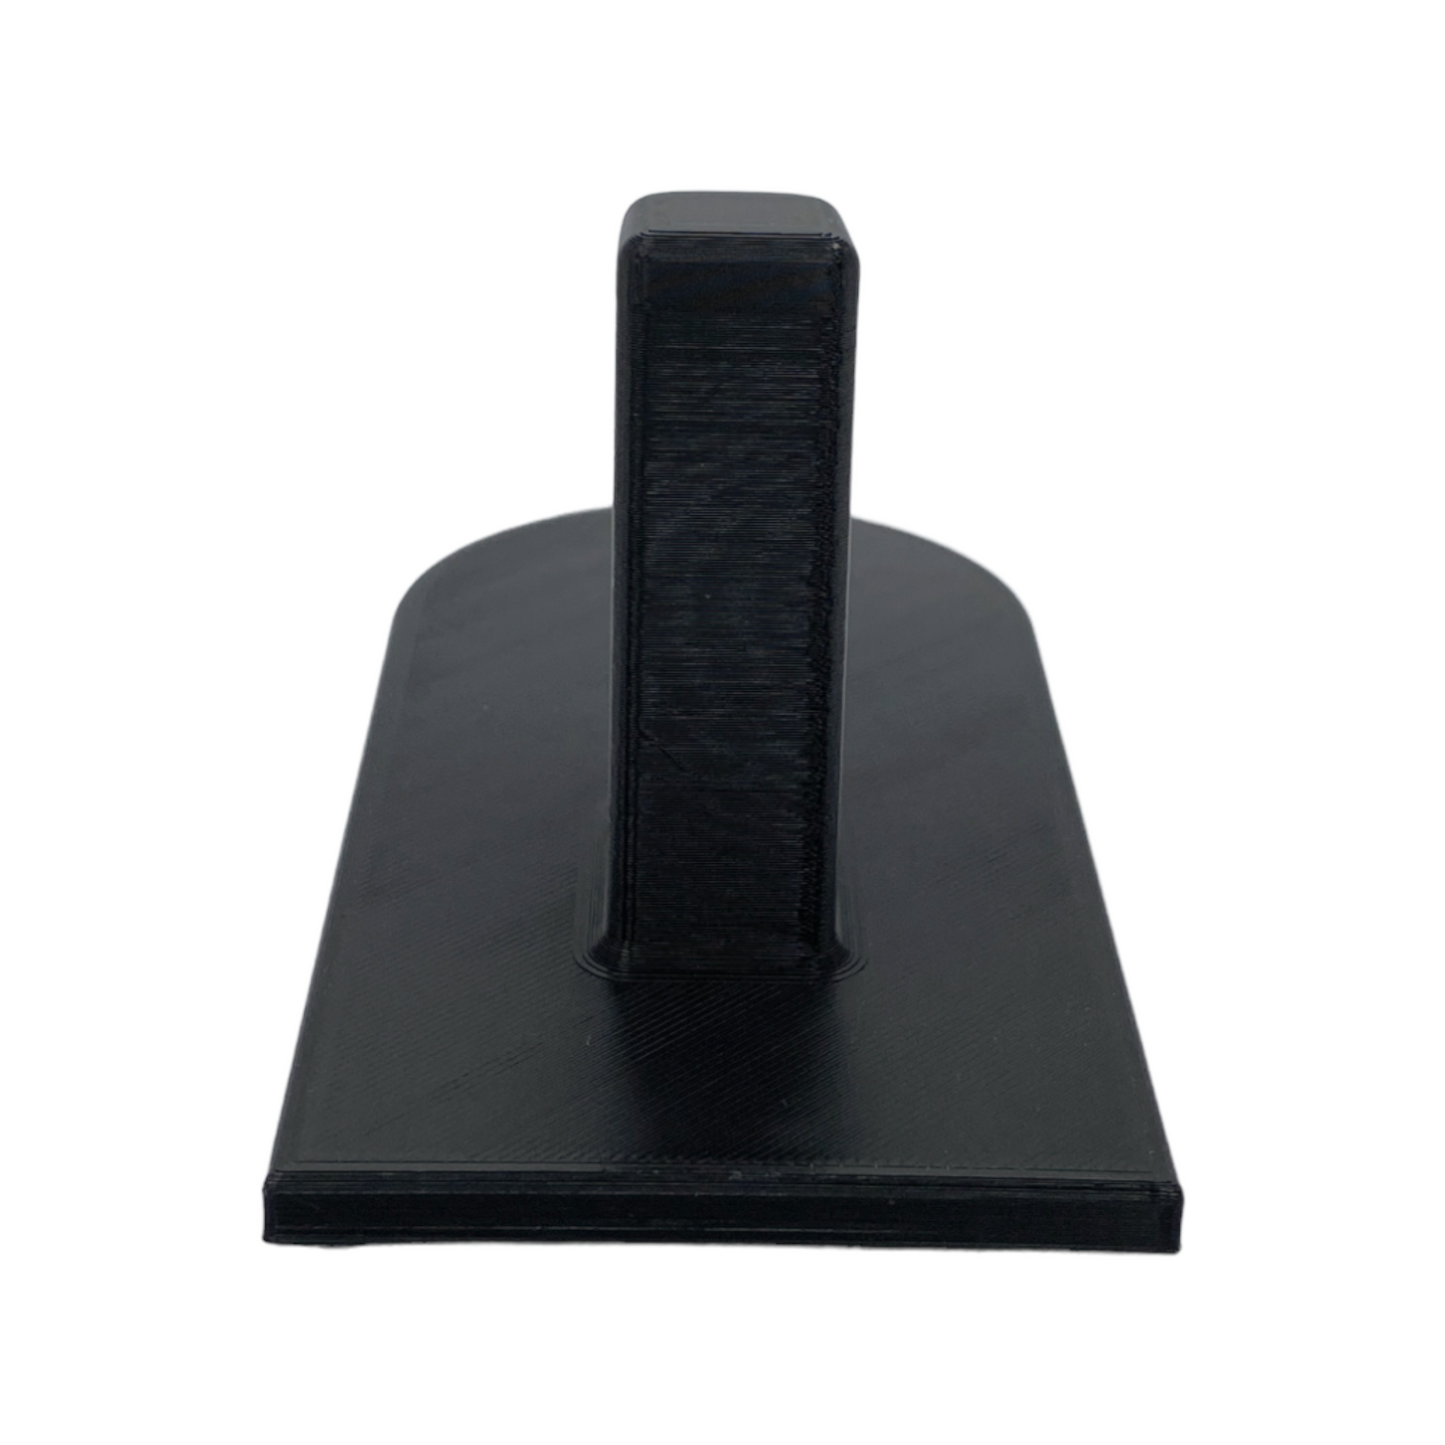 Glock Compatible Stand